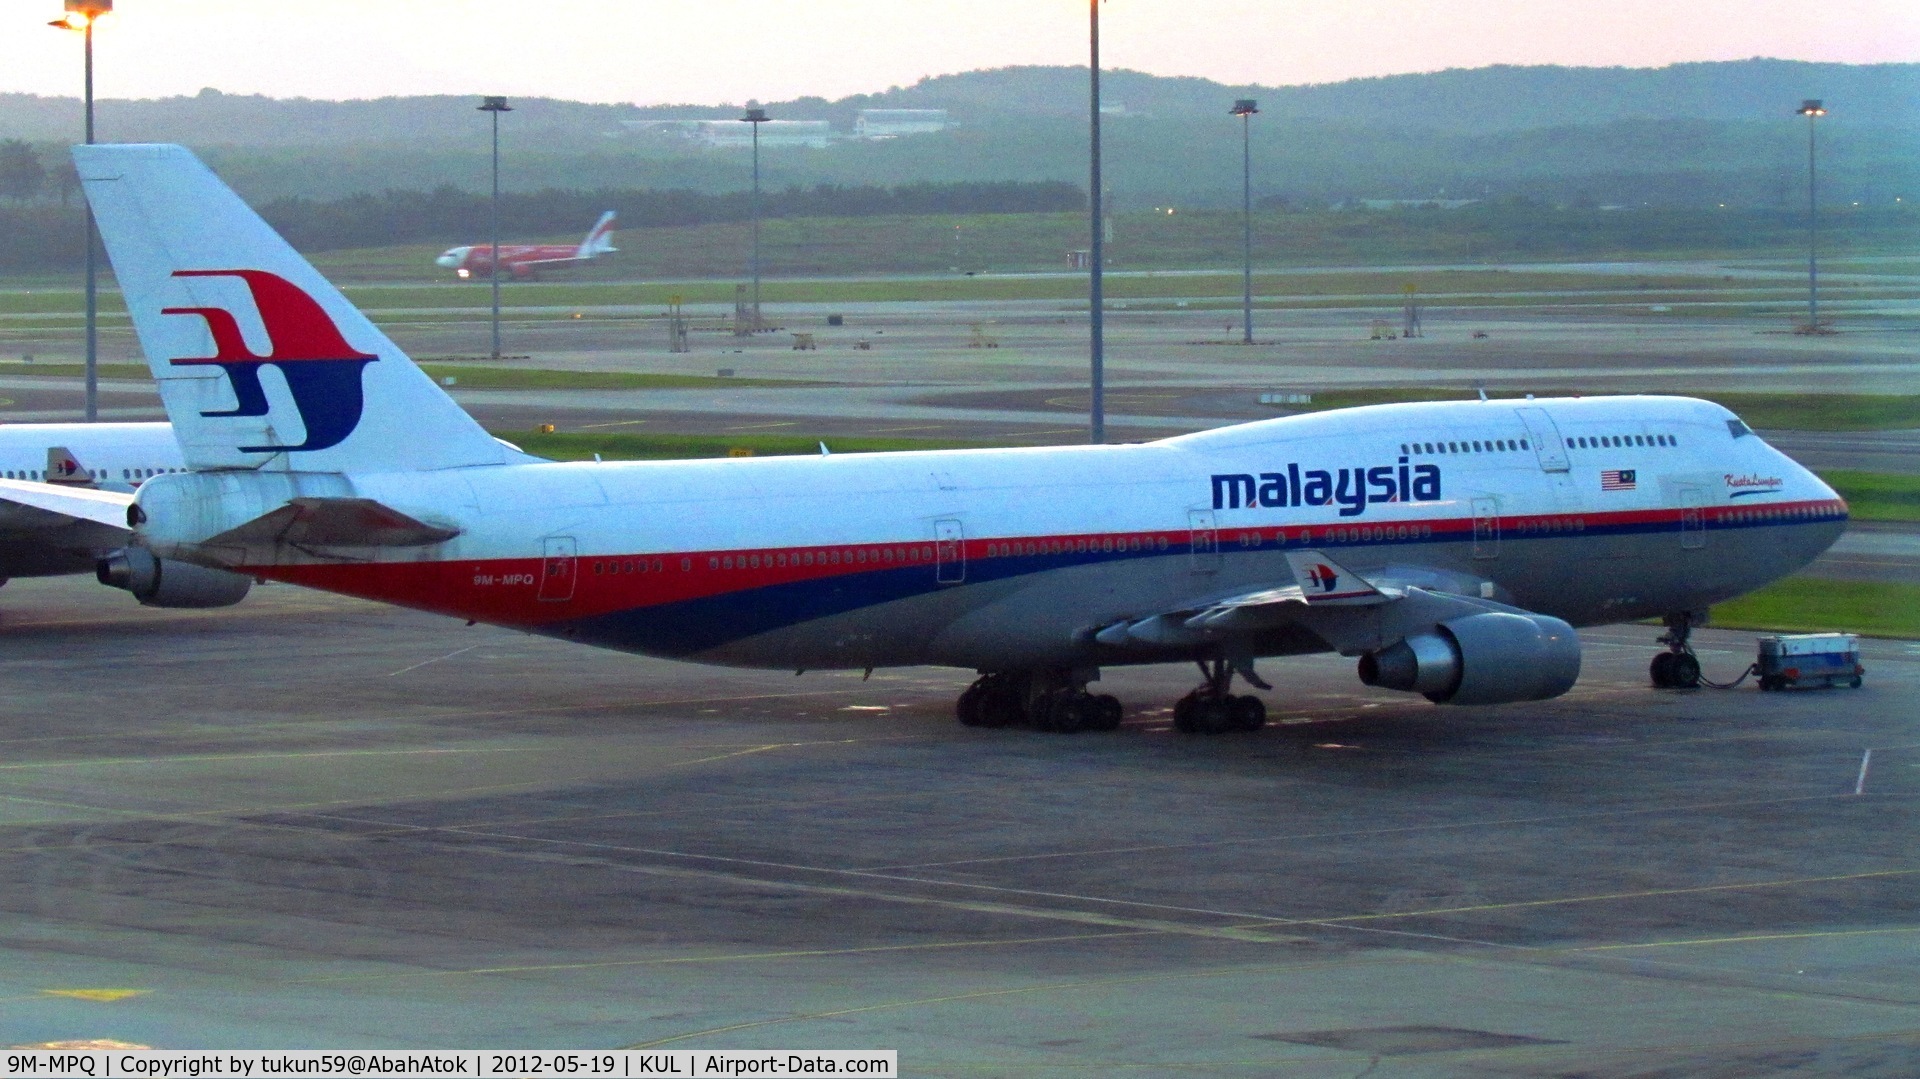 9M-MPQ, 2002 Boeing 747-4H6 C/N 29901, Malaysia Airlines